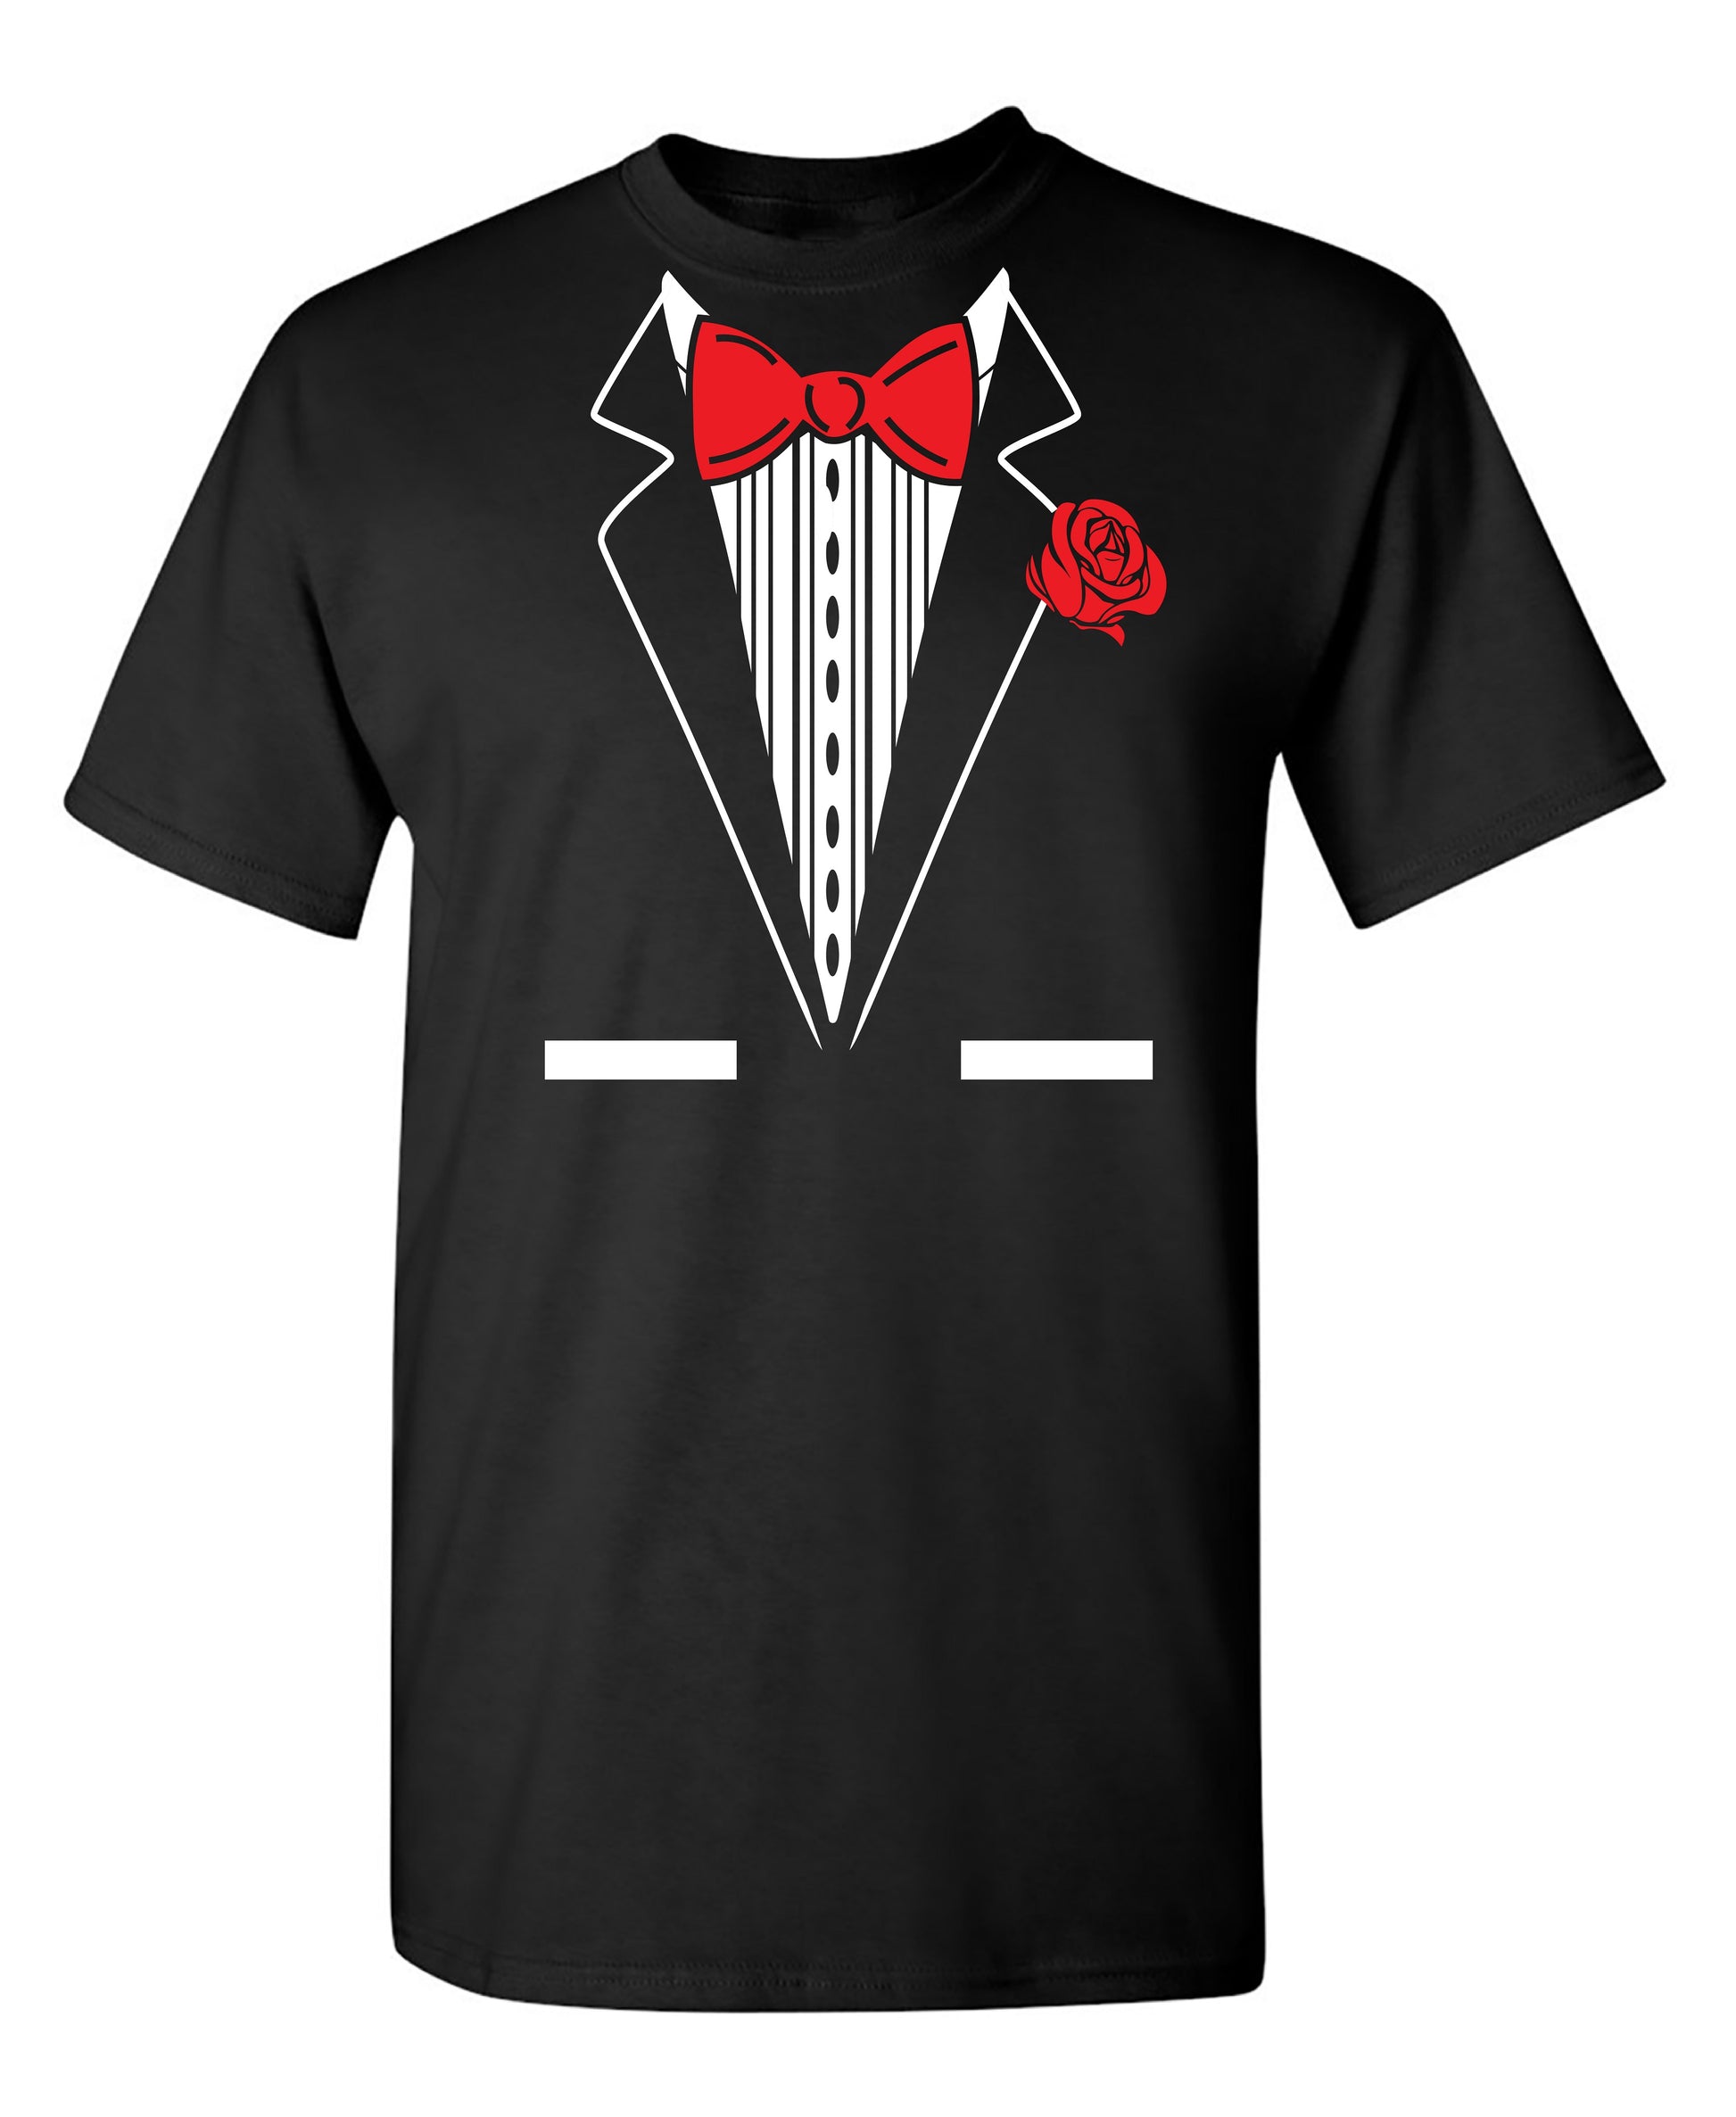 TUXEDO Red 100% Cotton - Graphic Tees